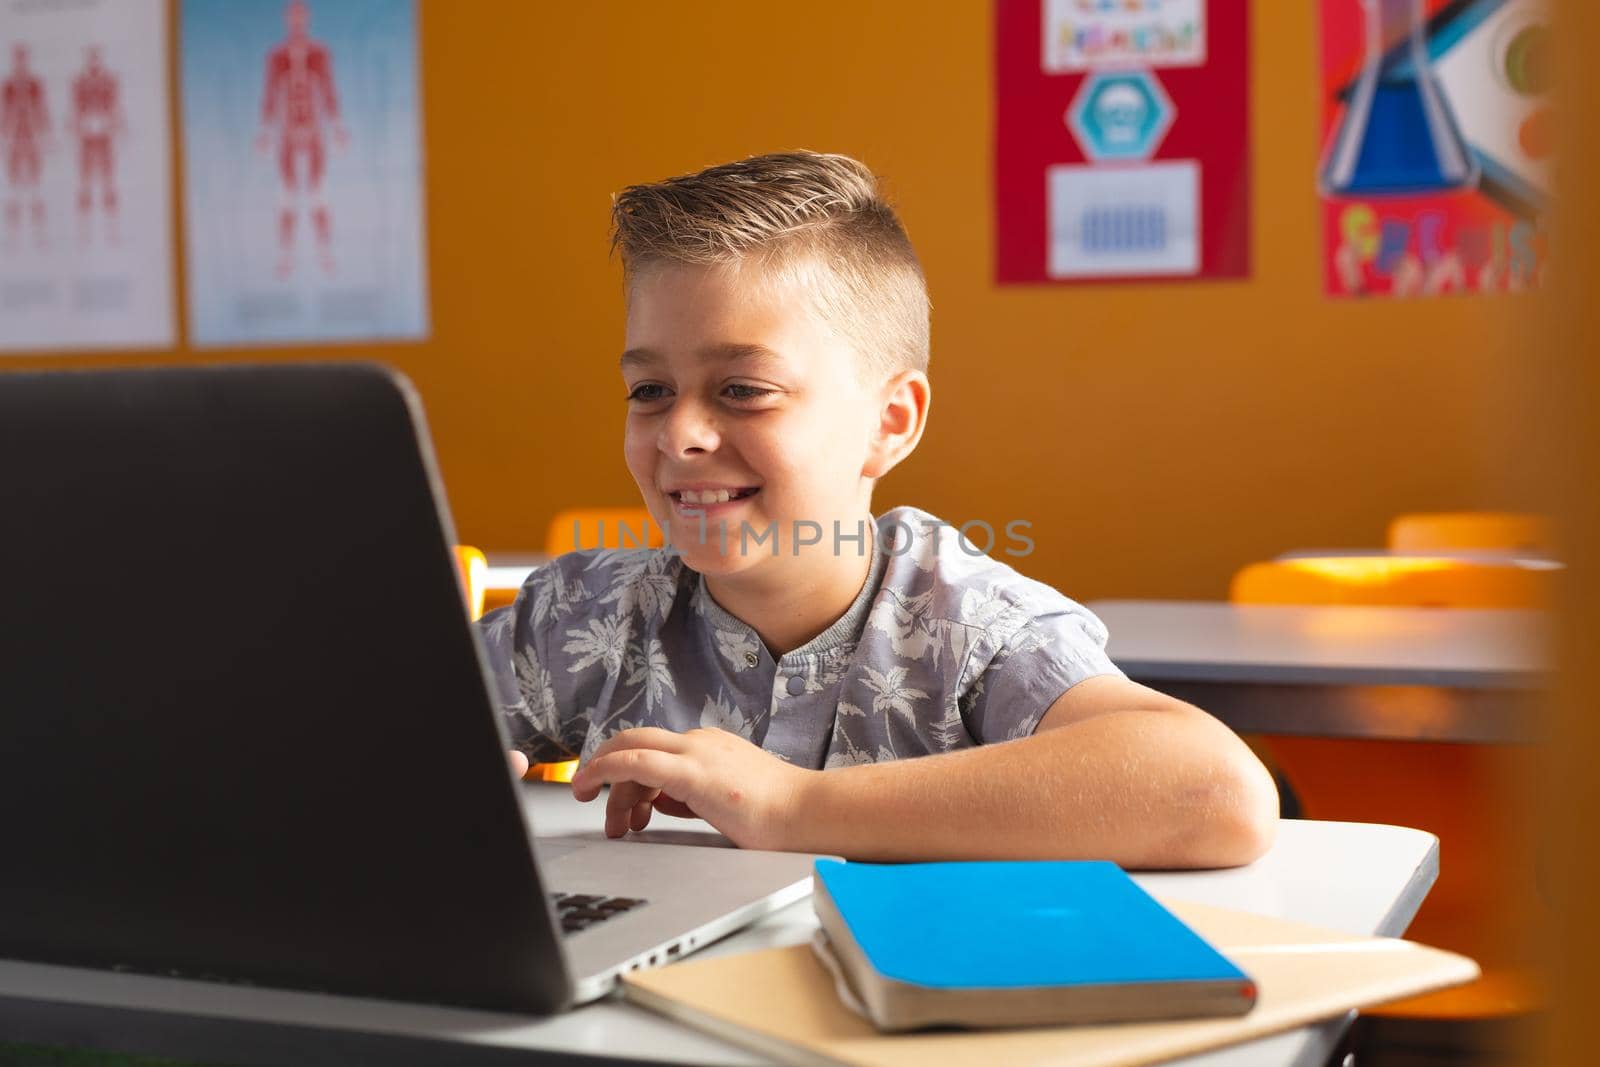 Caucasian boy sitting at a desk in classroom using laptop and smiling by Wavebreakmedia